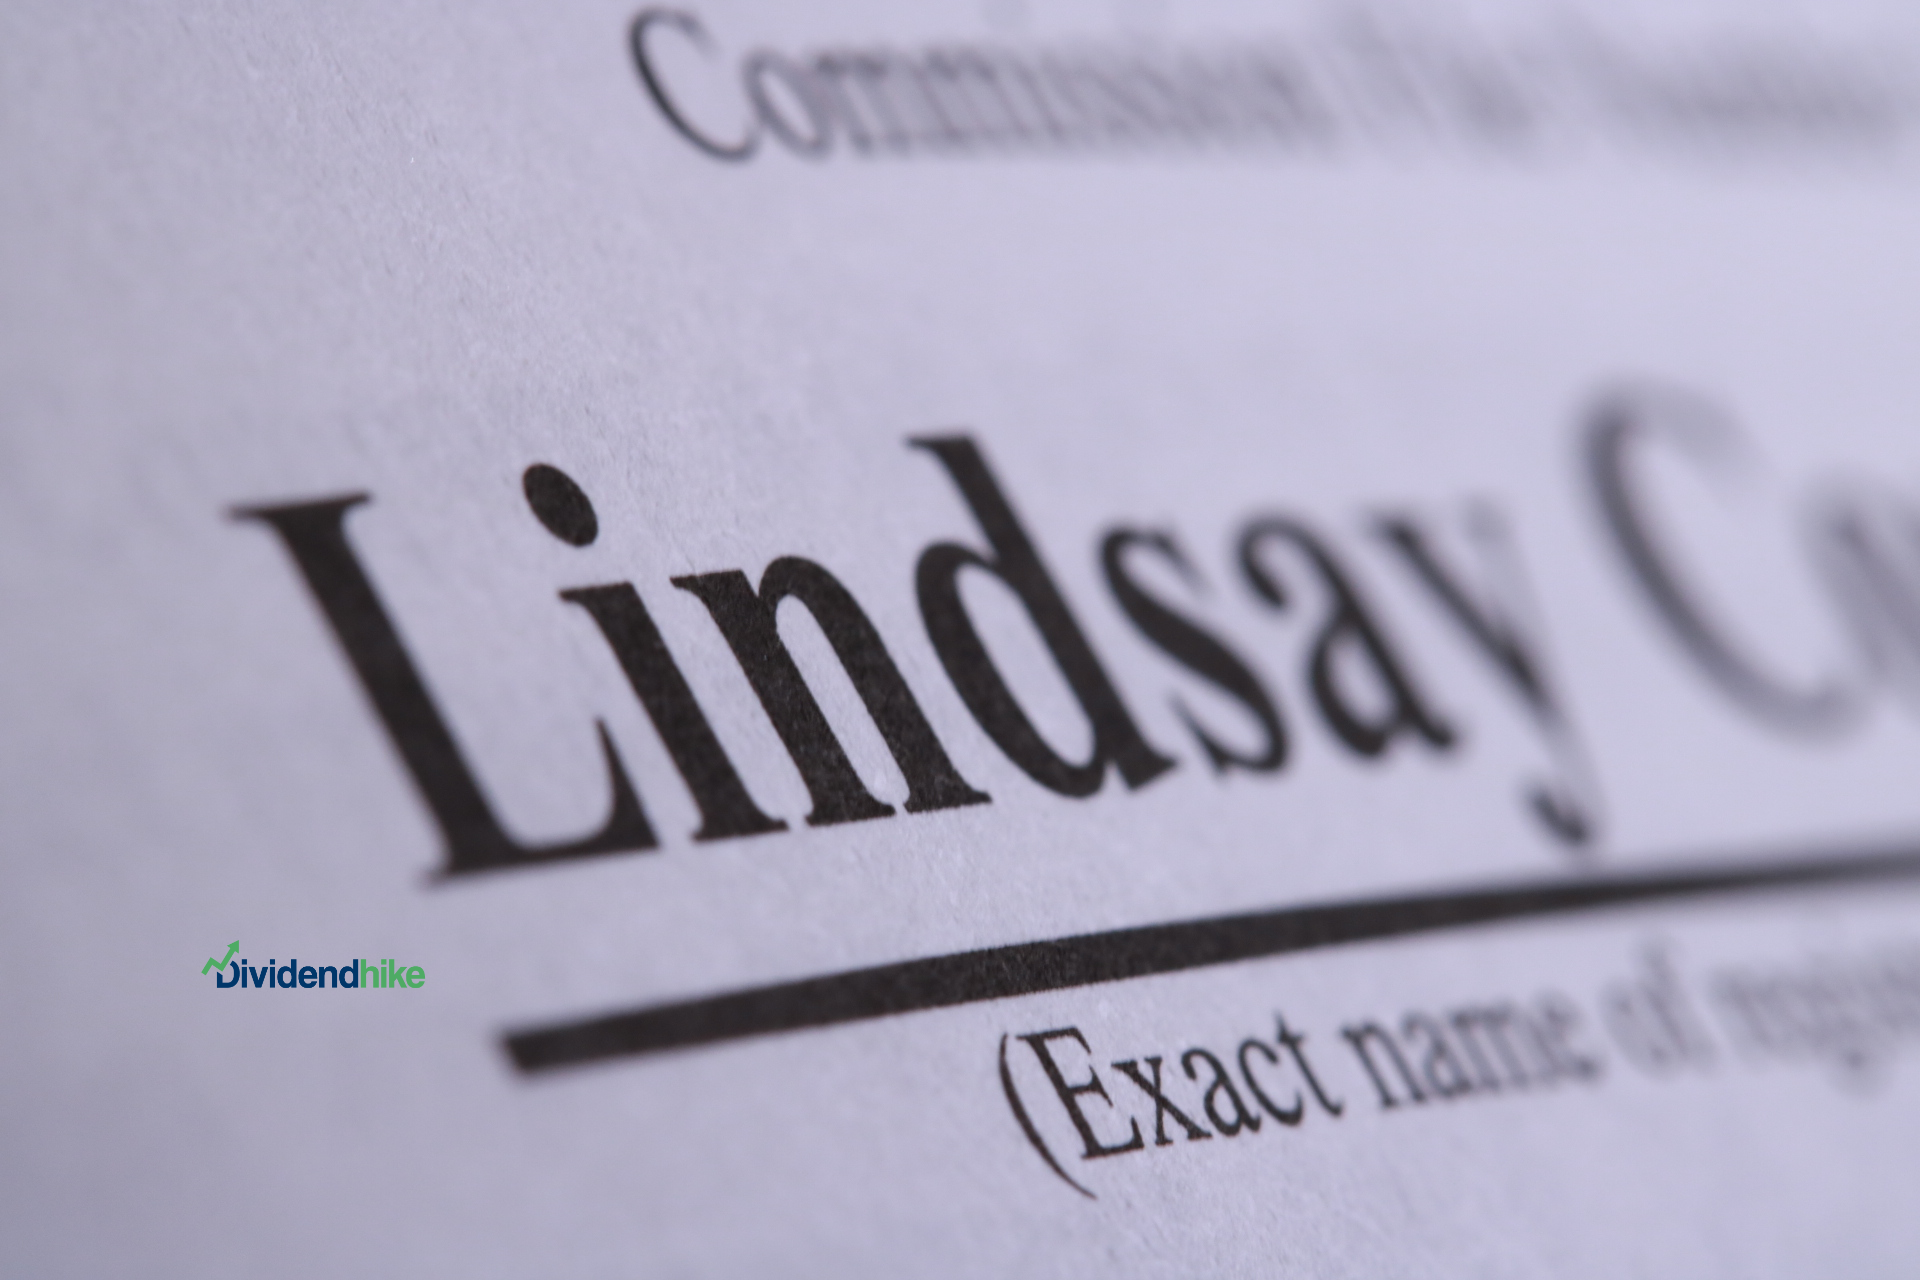 Lindsay Corporation has paid a dividend to its shareholders every year since 1996 © dividendhike.com